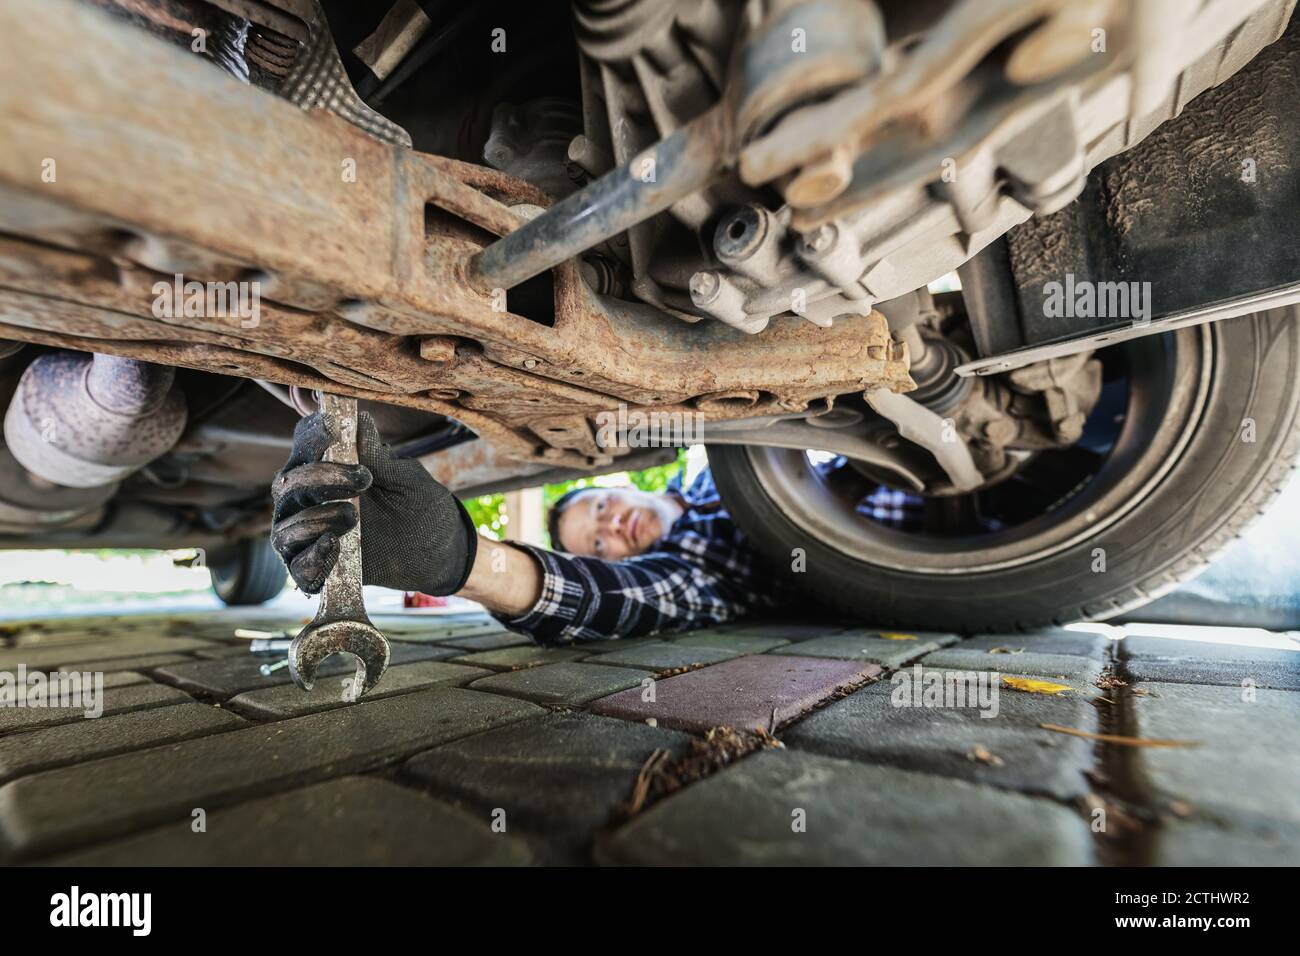 man repairing car. mechanic inspecting suspension system under the vehicle at home garage Stock Photo